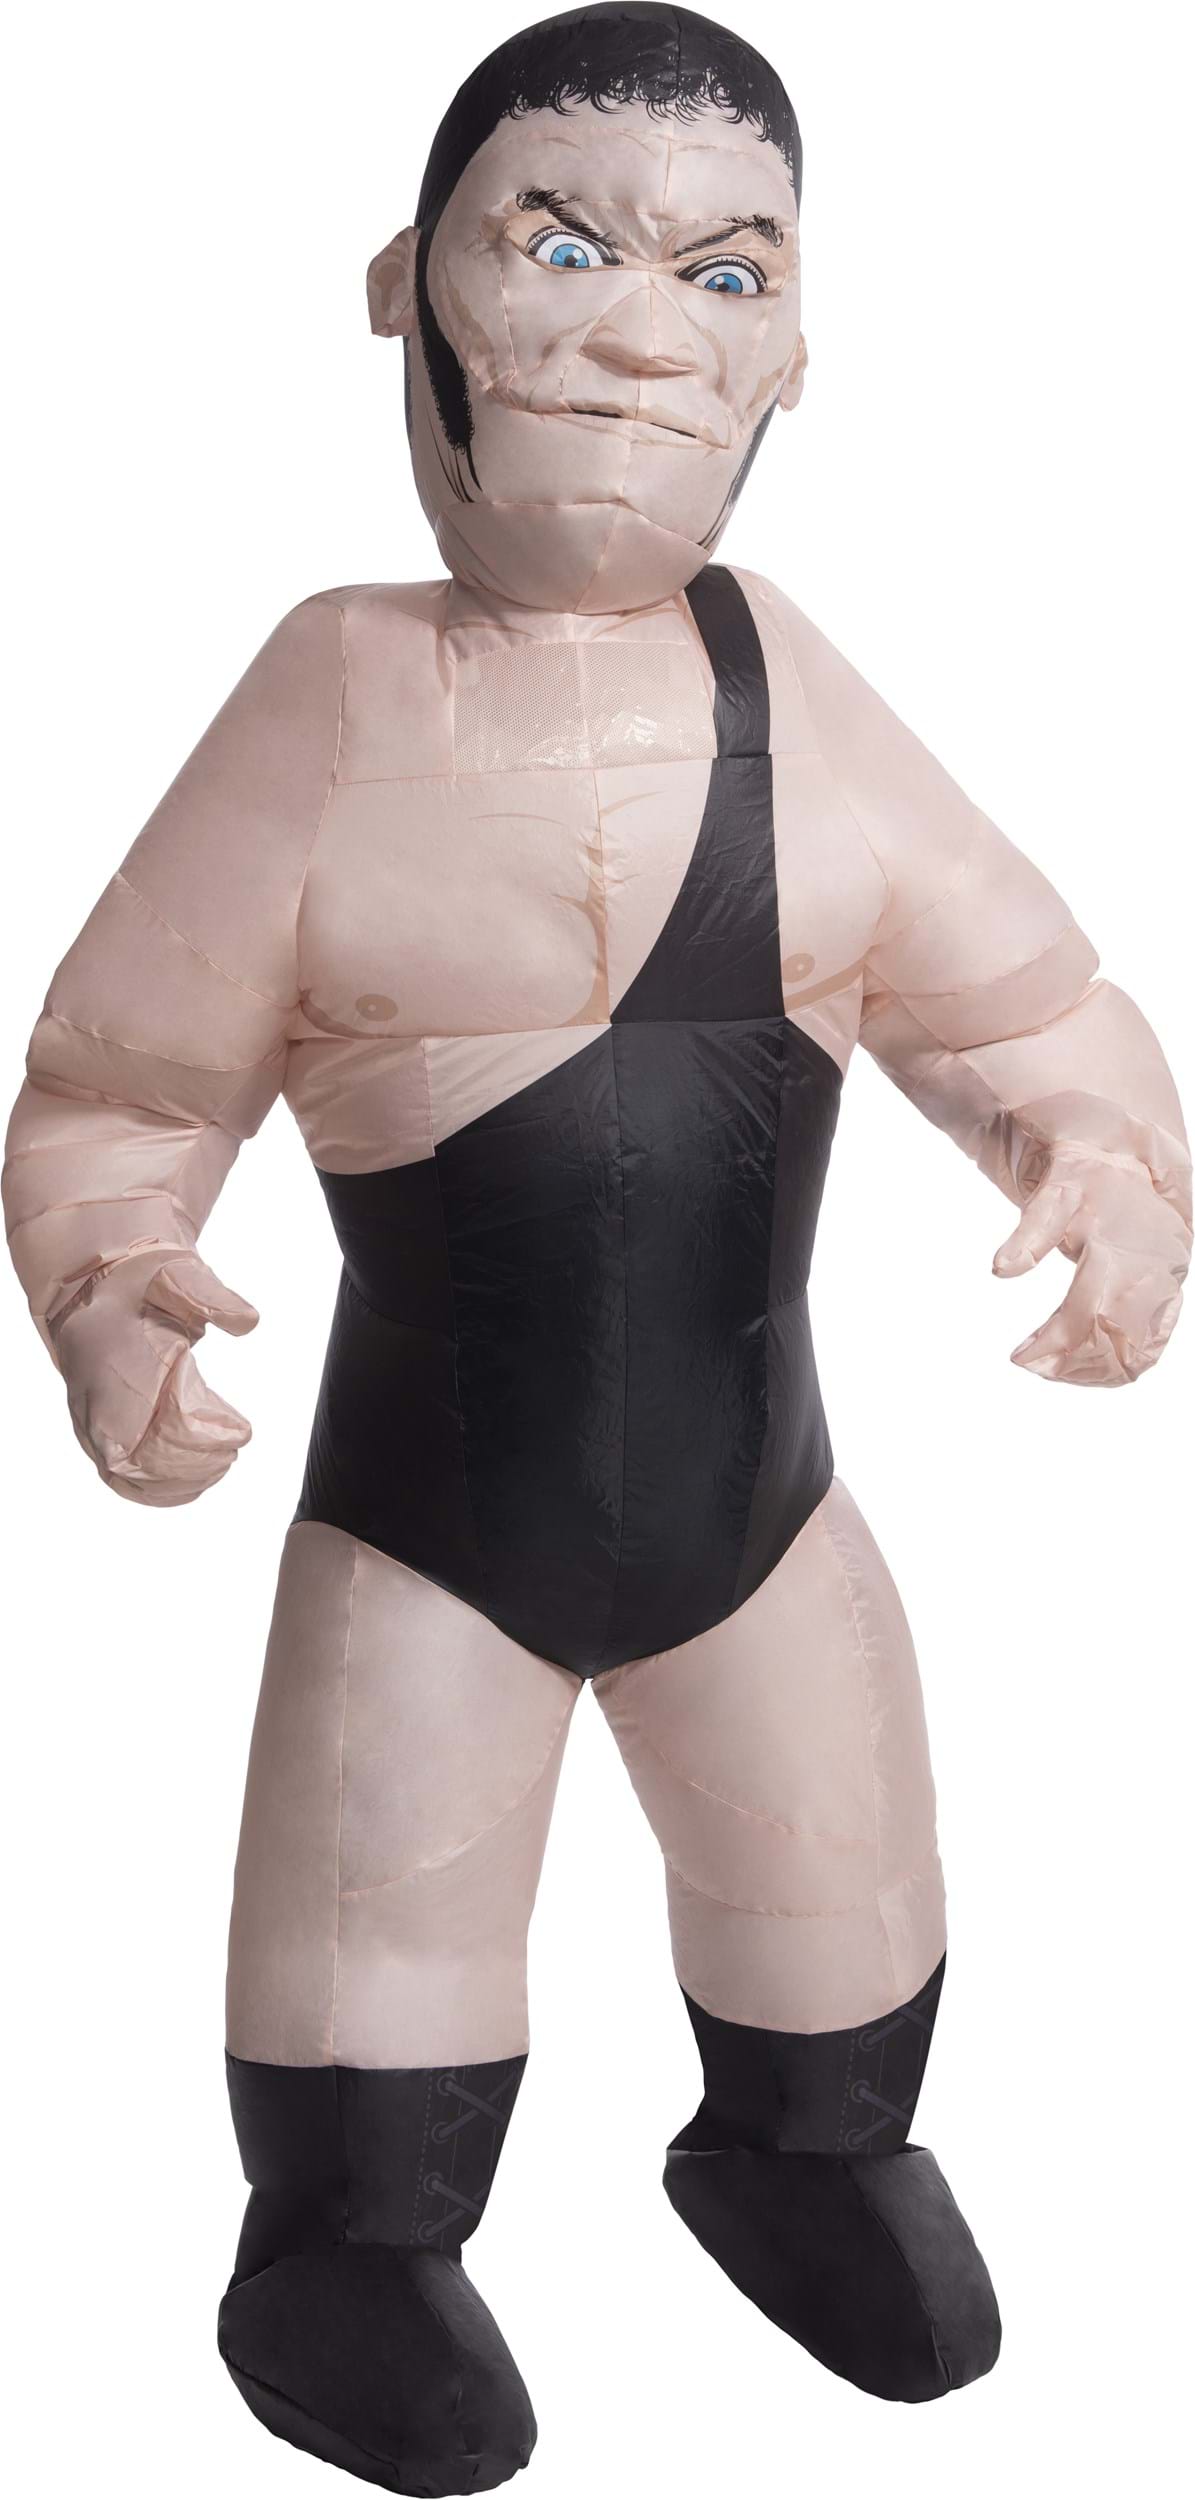 Image of Adult WWE Inflatable Andre the Giant Costume ID RU700963-ST